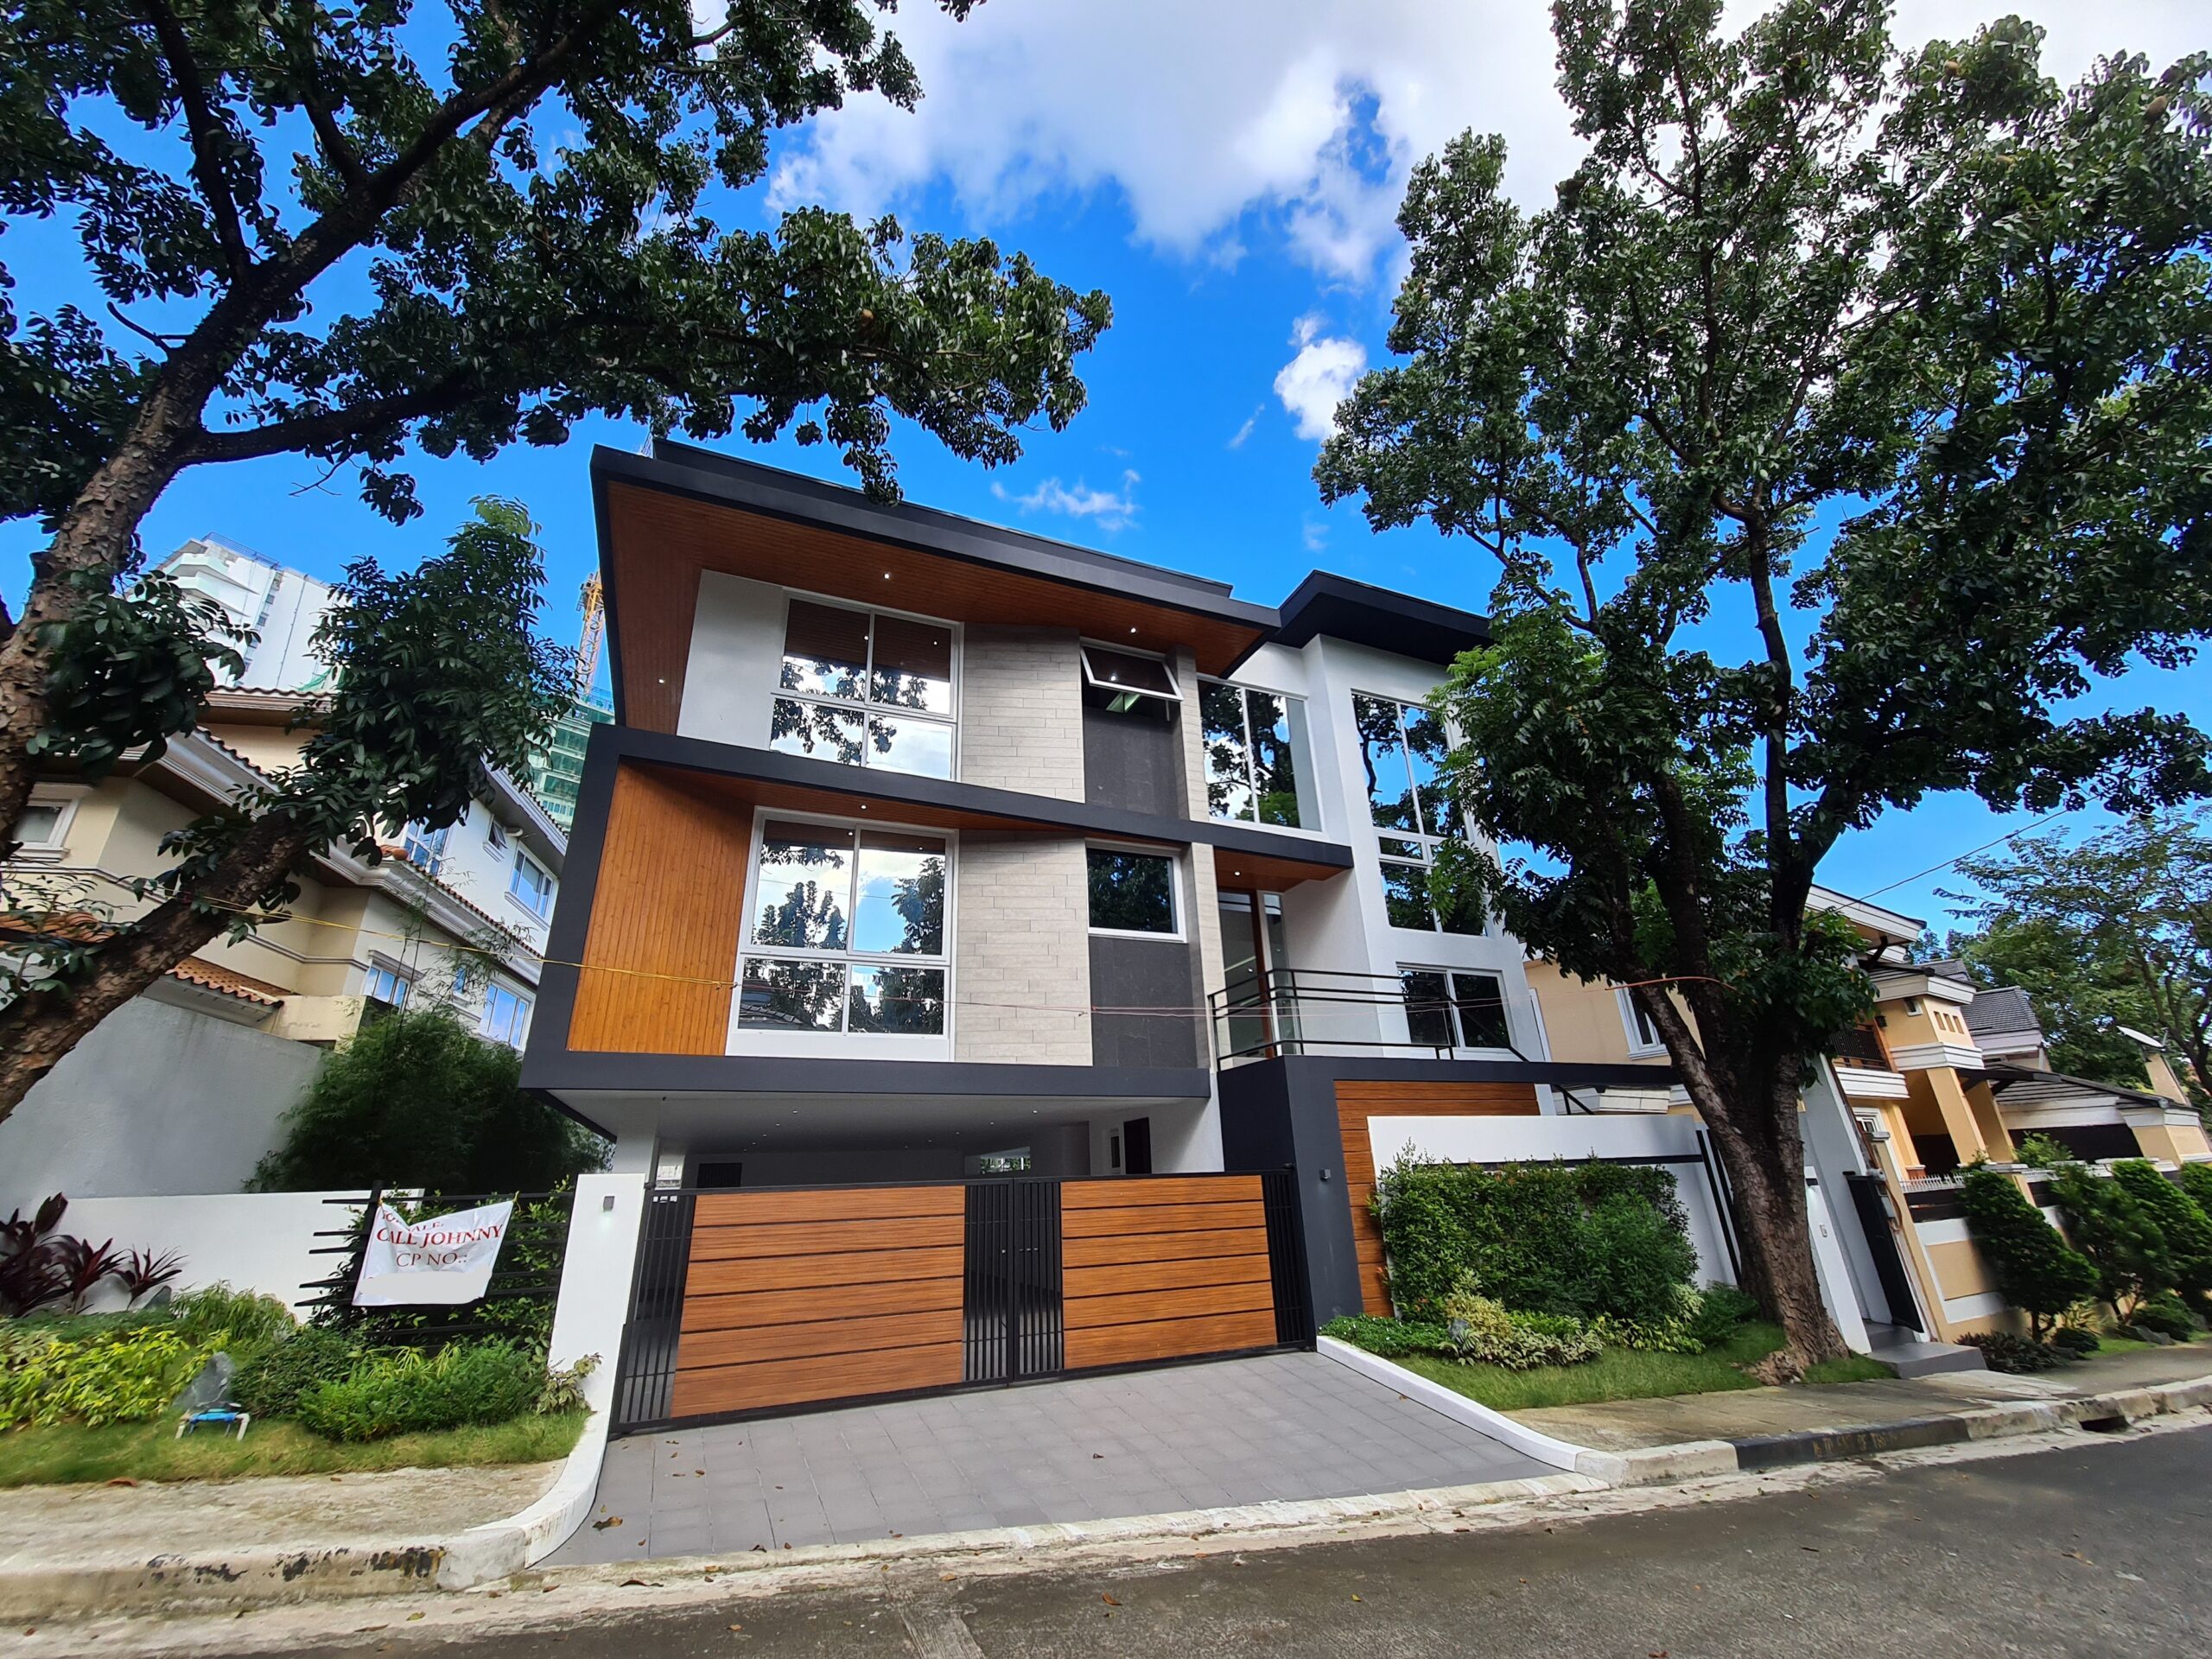 Classic 3-story House with Stunning Facade in Don Antoñio Heights, Quezon City